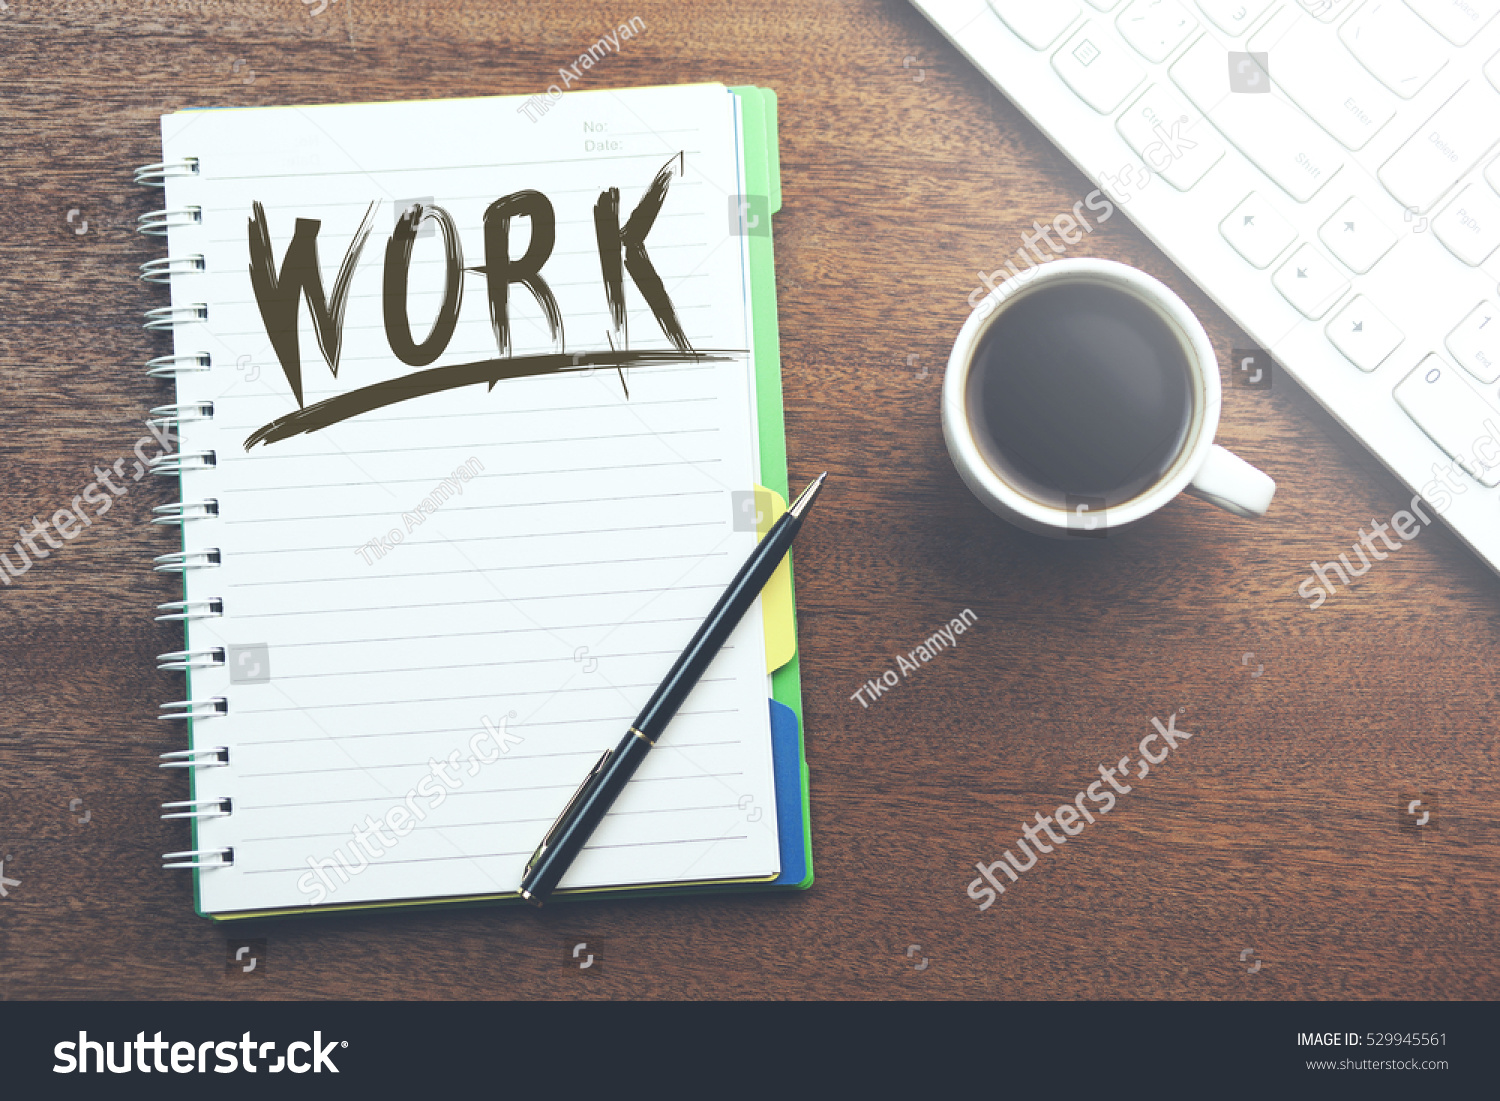 Work text on notebook with coffee and keyboard #529945561